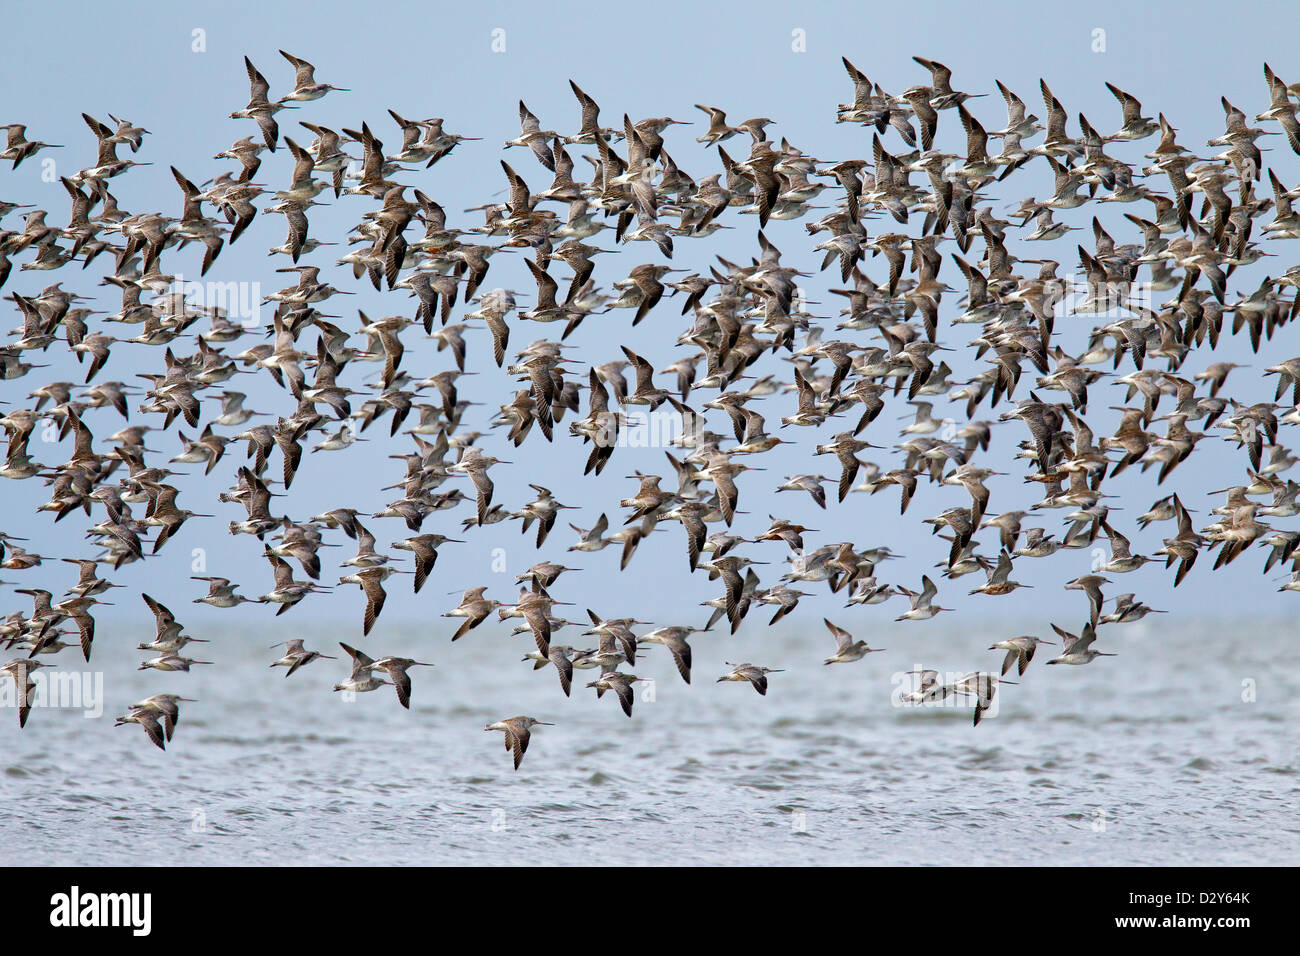 Bar-tailed Godwit (Limosa lapponica) flock in flight over the Wadden Sea National Park, Germany Stock Photo